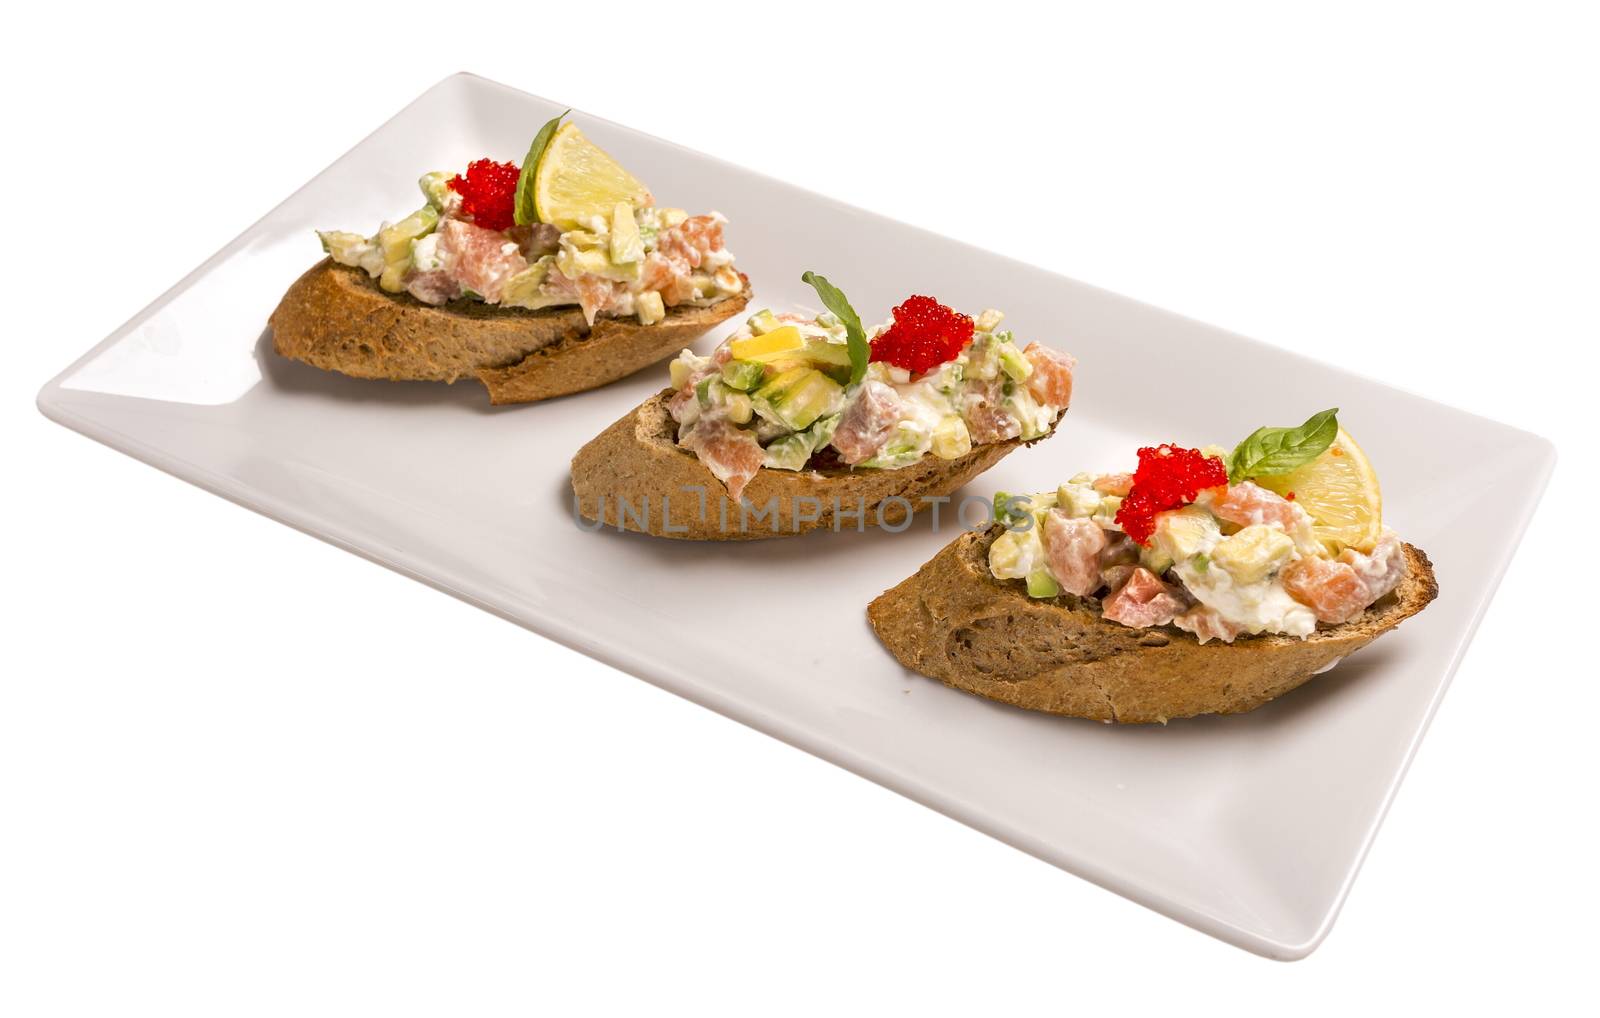 Bruschetta with salmon and avocado. Isolated image on white background. by 977_ReX_977